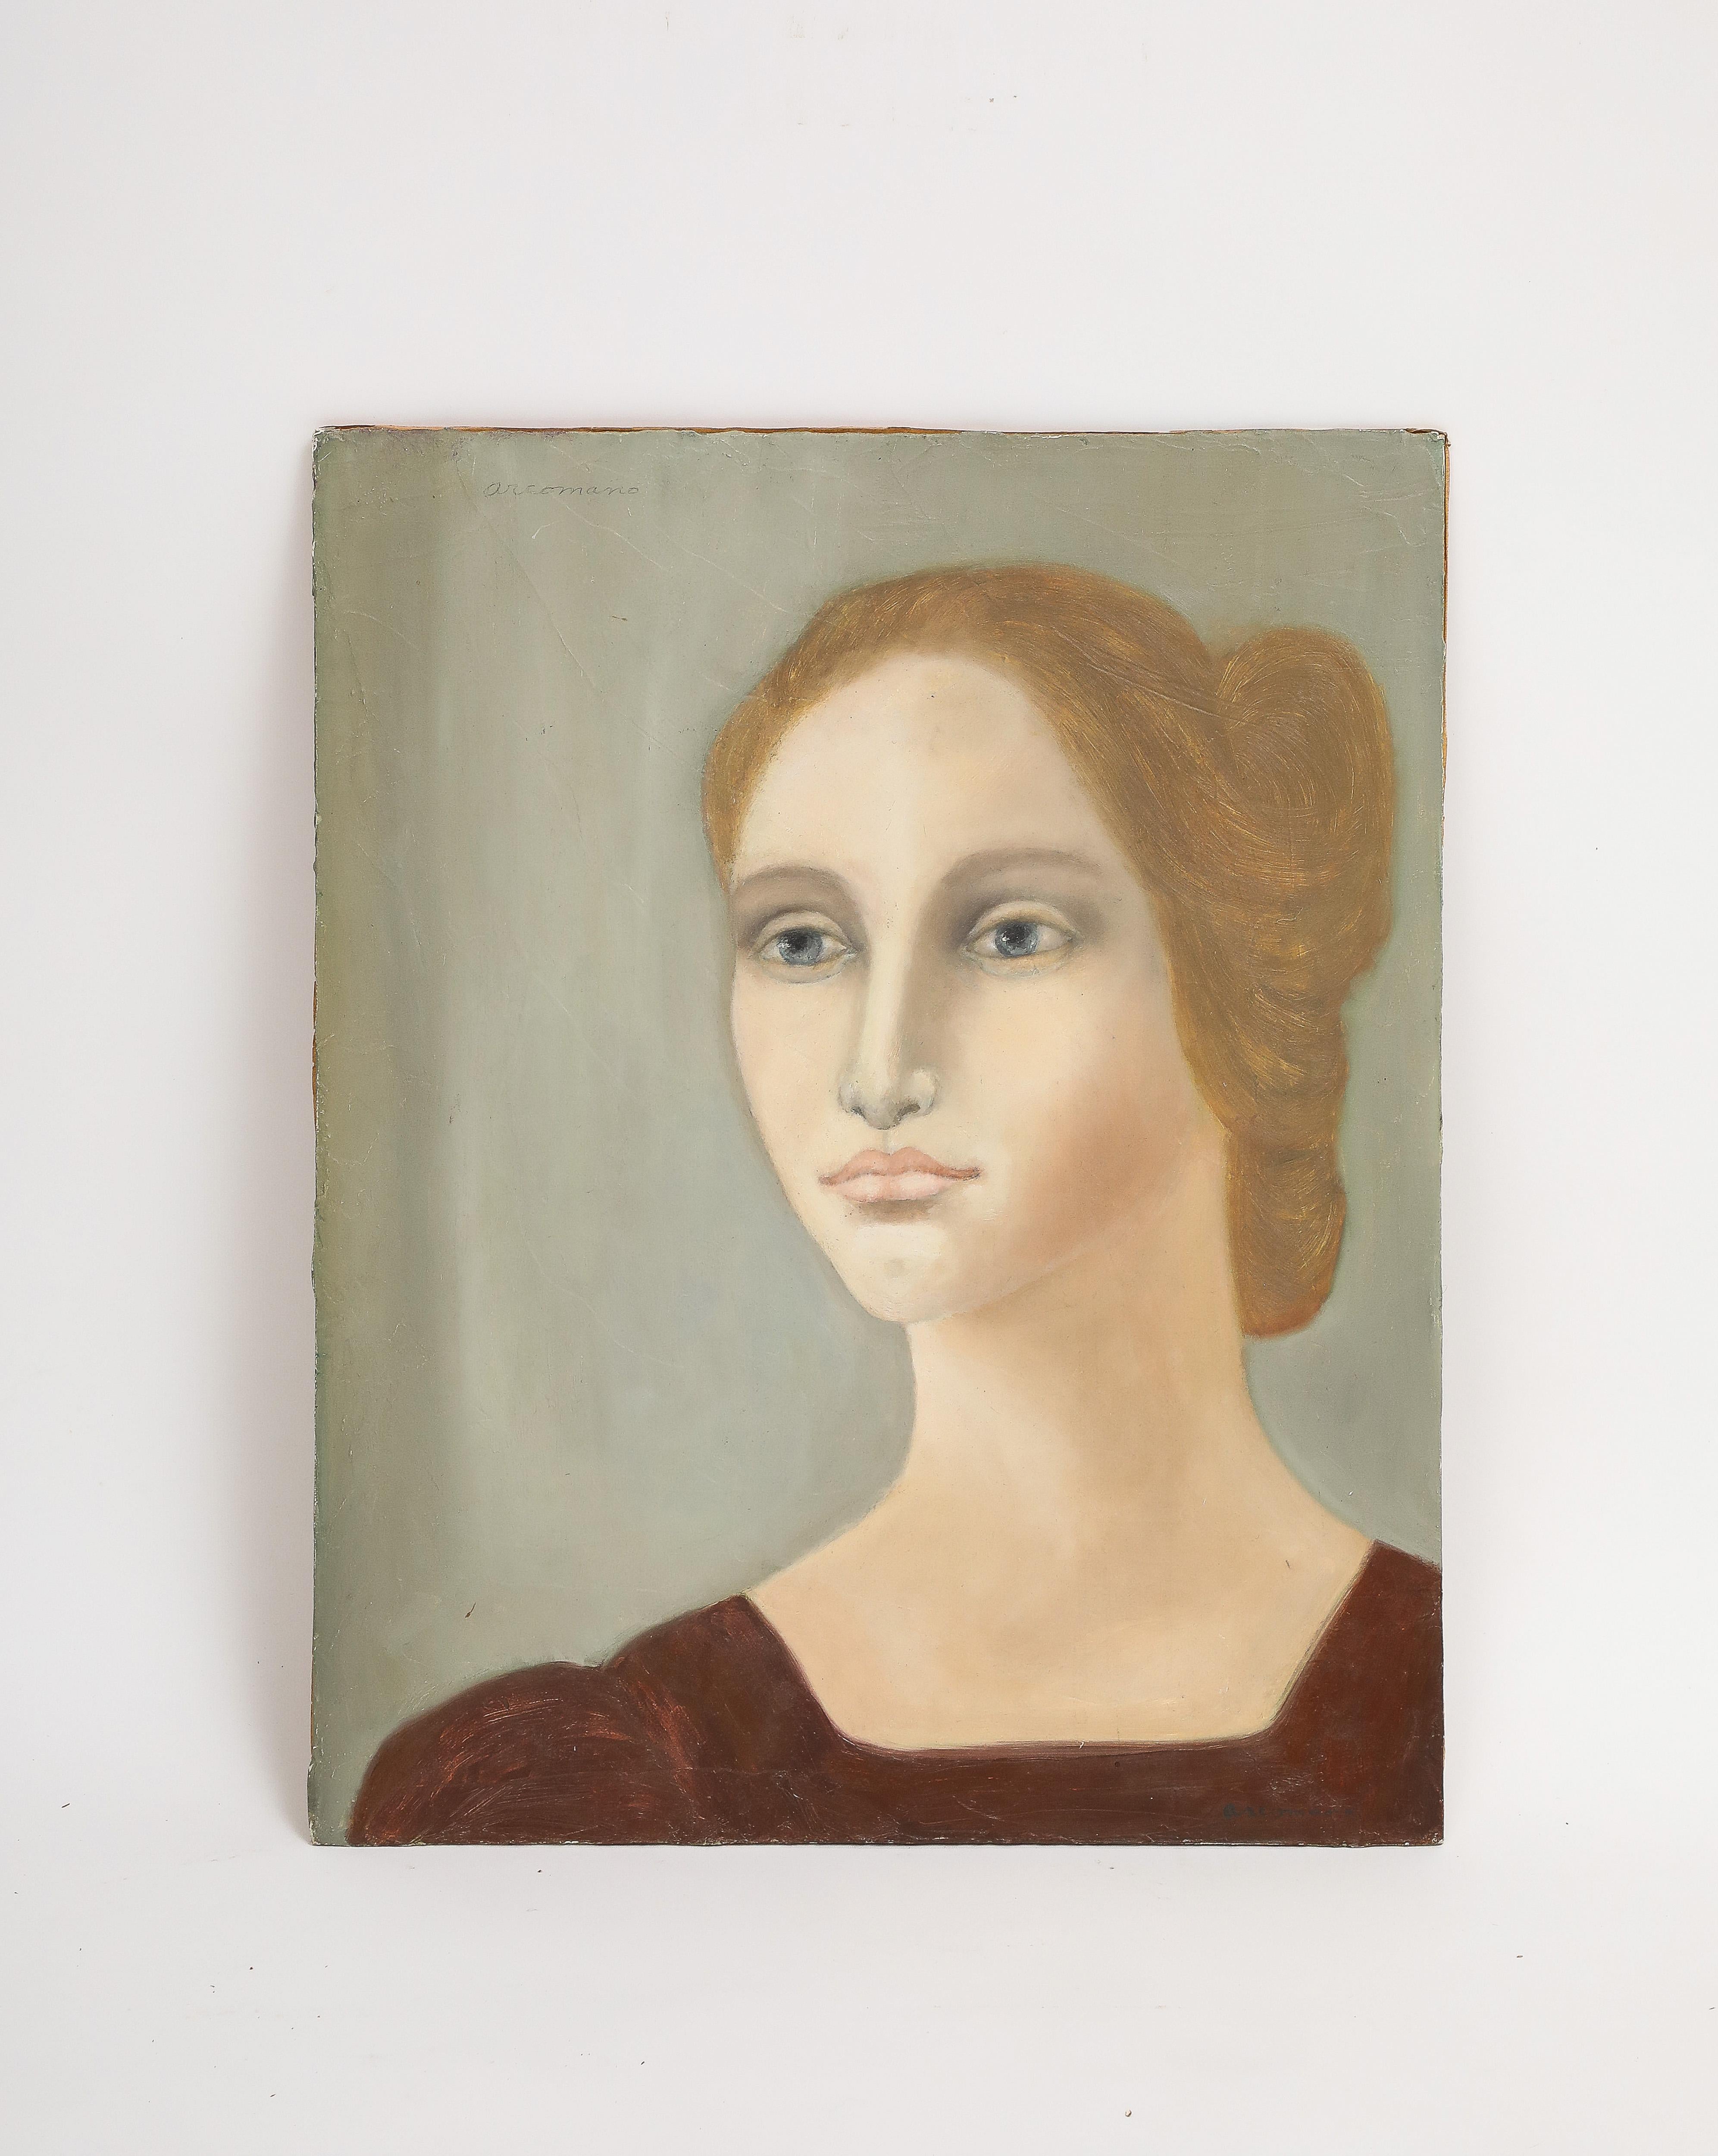 Portrait of a Woman by Cathryn Arcomano, oil on canvas board, signed 1972. Numbered #5. 

This is an original portrait oil painting on canvas board by artist Cathryn Buckley Arcomano (American, 1923-2012). Arcomano was an international artist who